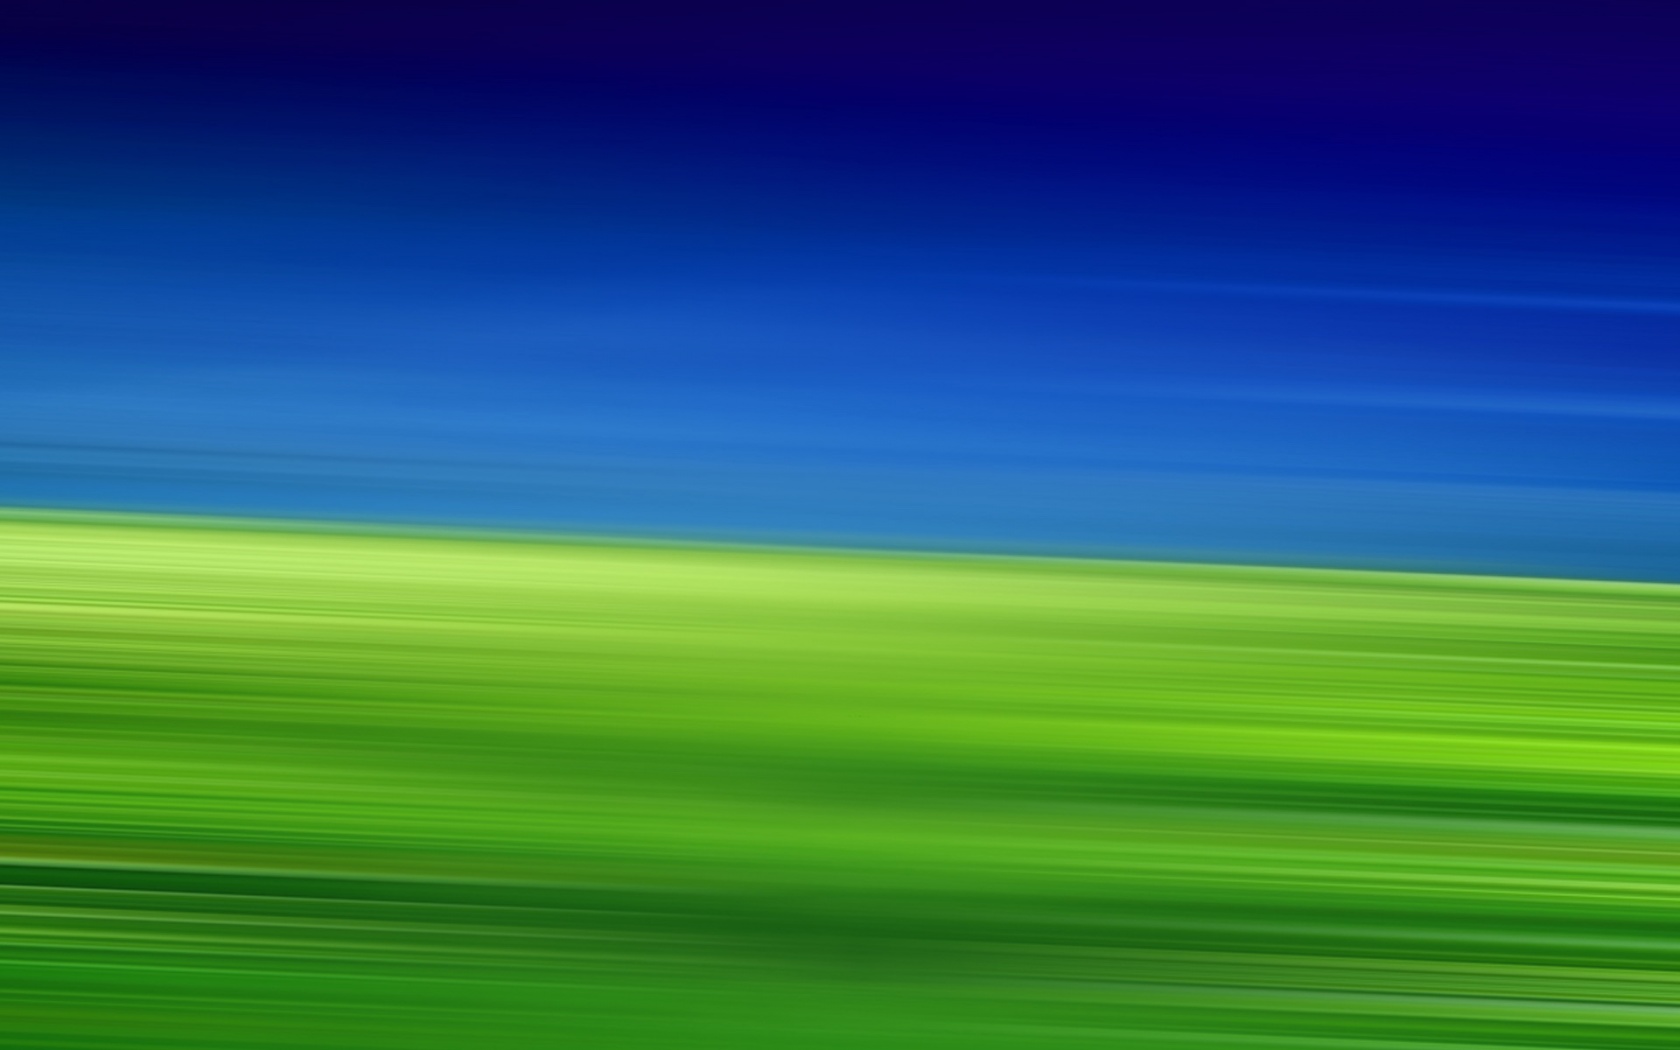 Free Download Wallpaper Blue Green Blue Sky And Green Grass 1680x1050 For Your Desktop Mobile Tablet Explore 47 Grass And Sky Wallpaper Green Grass Wallpaper Hd Grass Wallpaper Grass Wallpaper Images